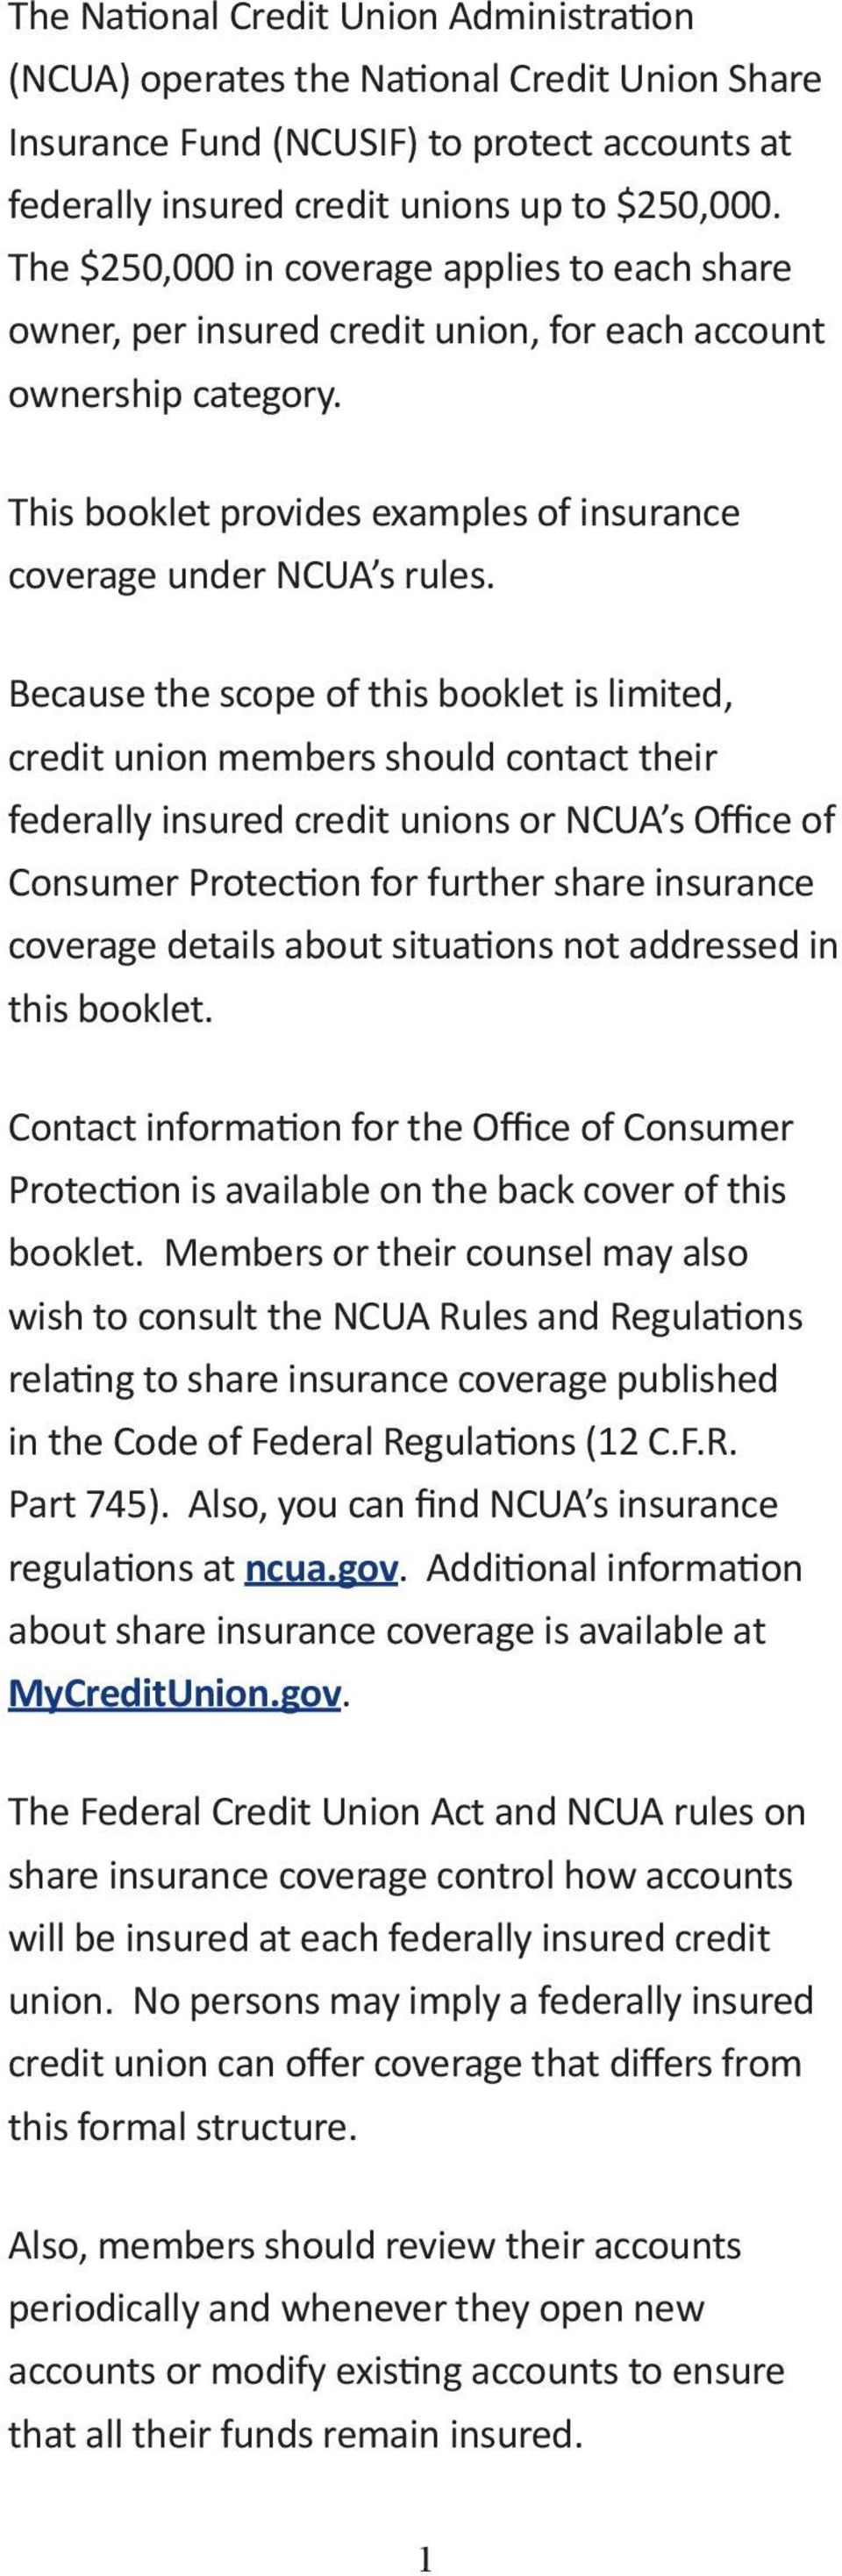 Because the scope of this booklet is limited, credit union members should contact their federally insured credit unions or NCUA s Office of Consumer Protection for further share insurance coverage